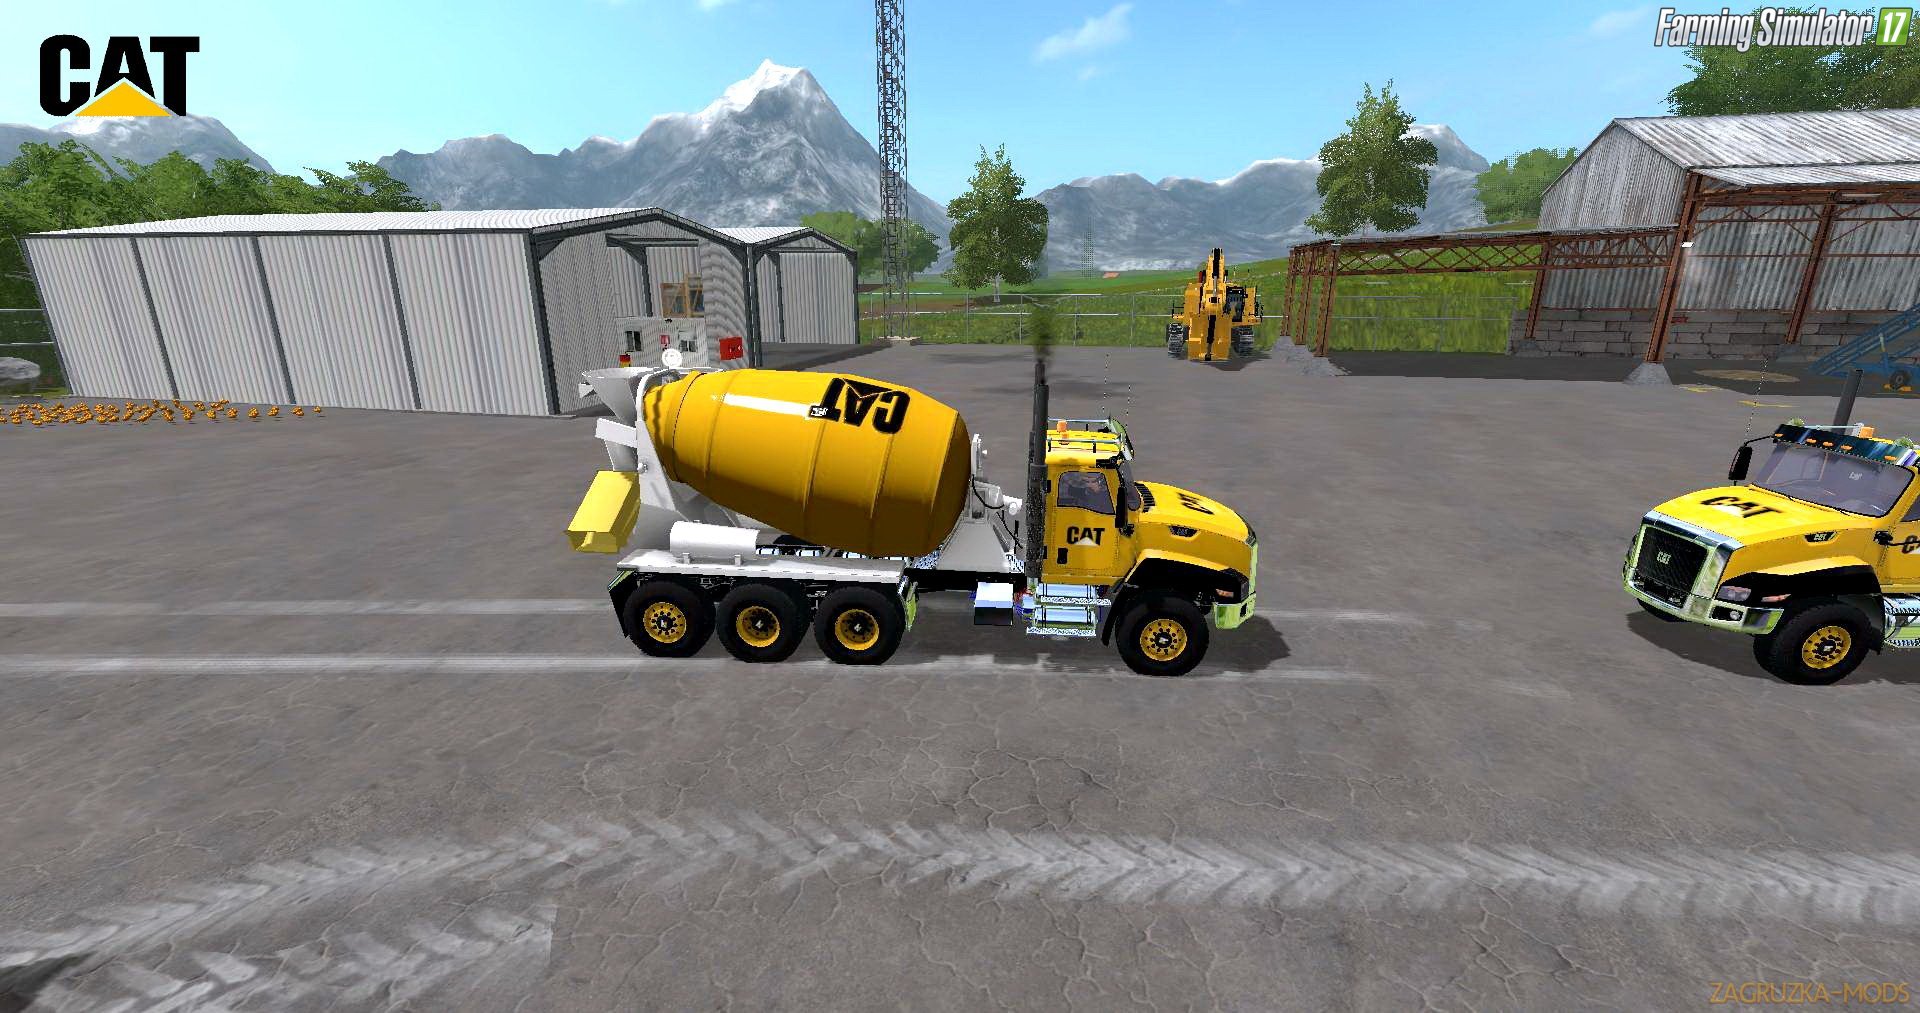 Cat CT660 Cement Mixer v1.0 for FS 17